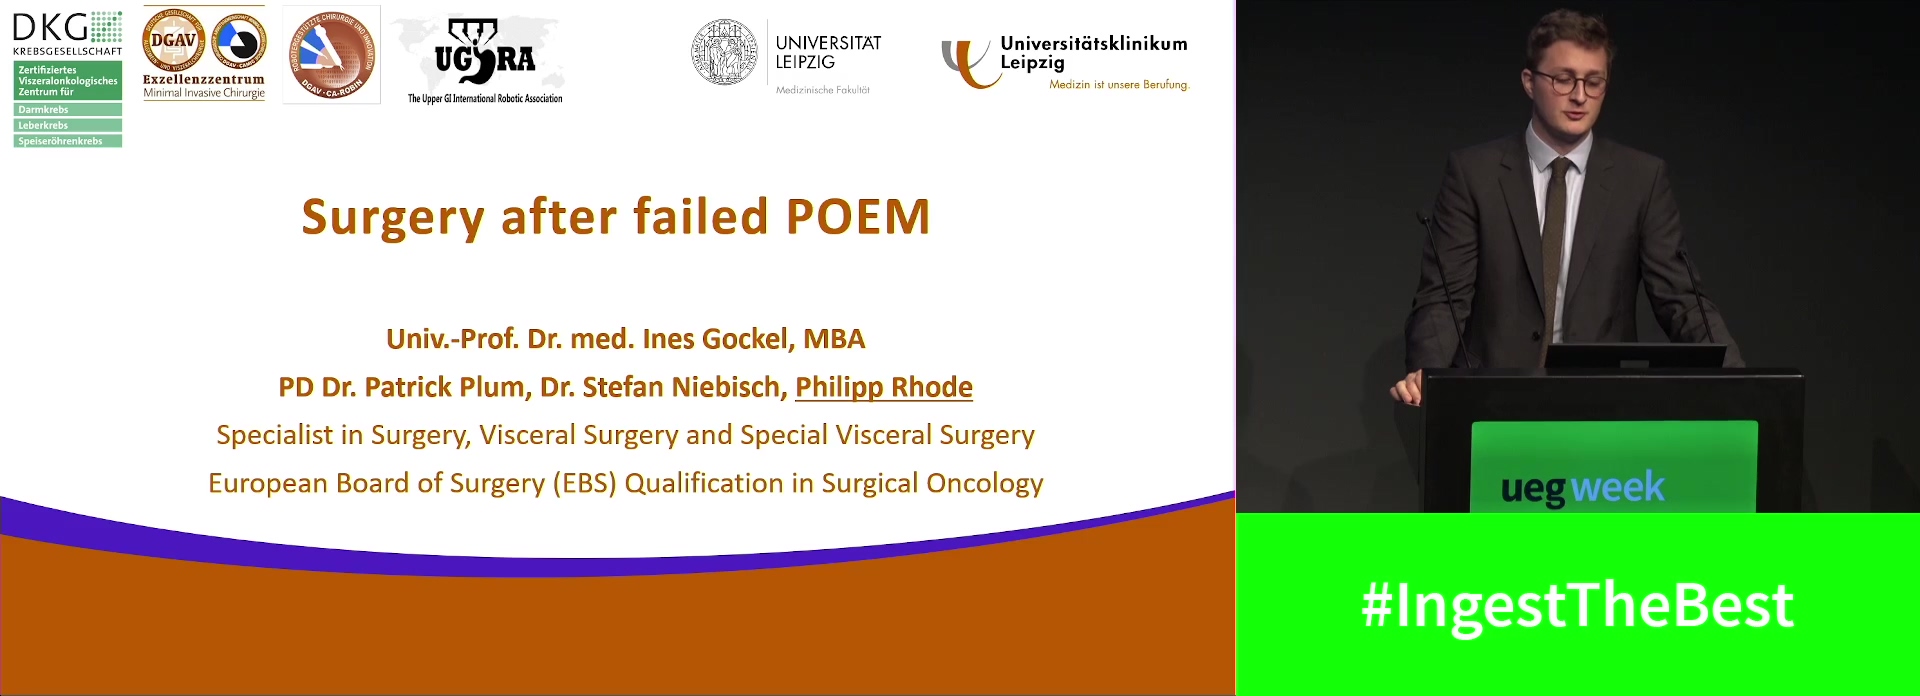 Surgery after failed POEM